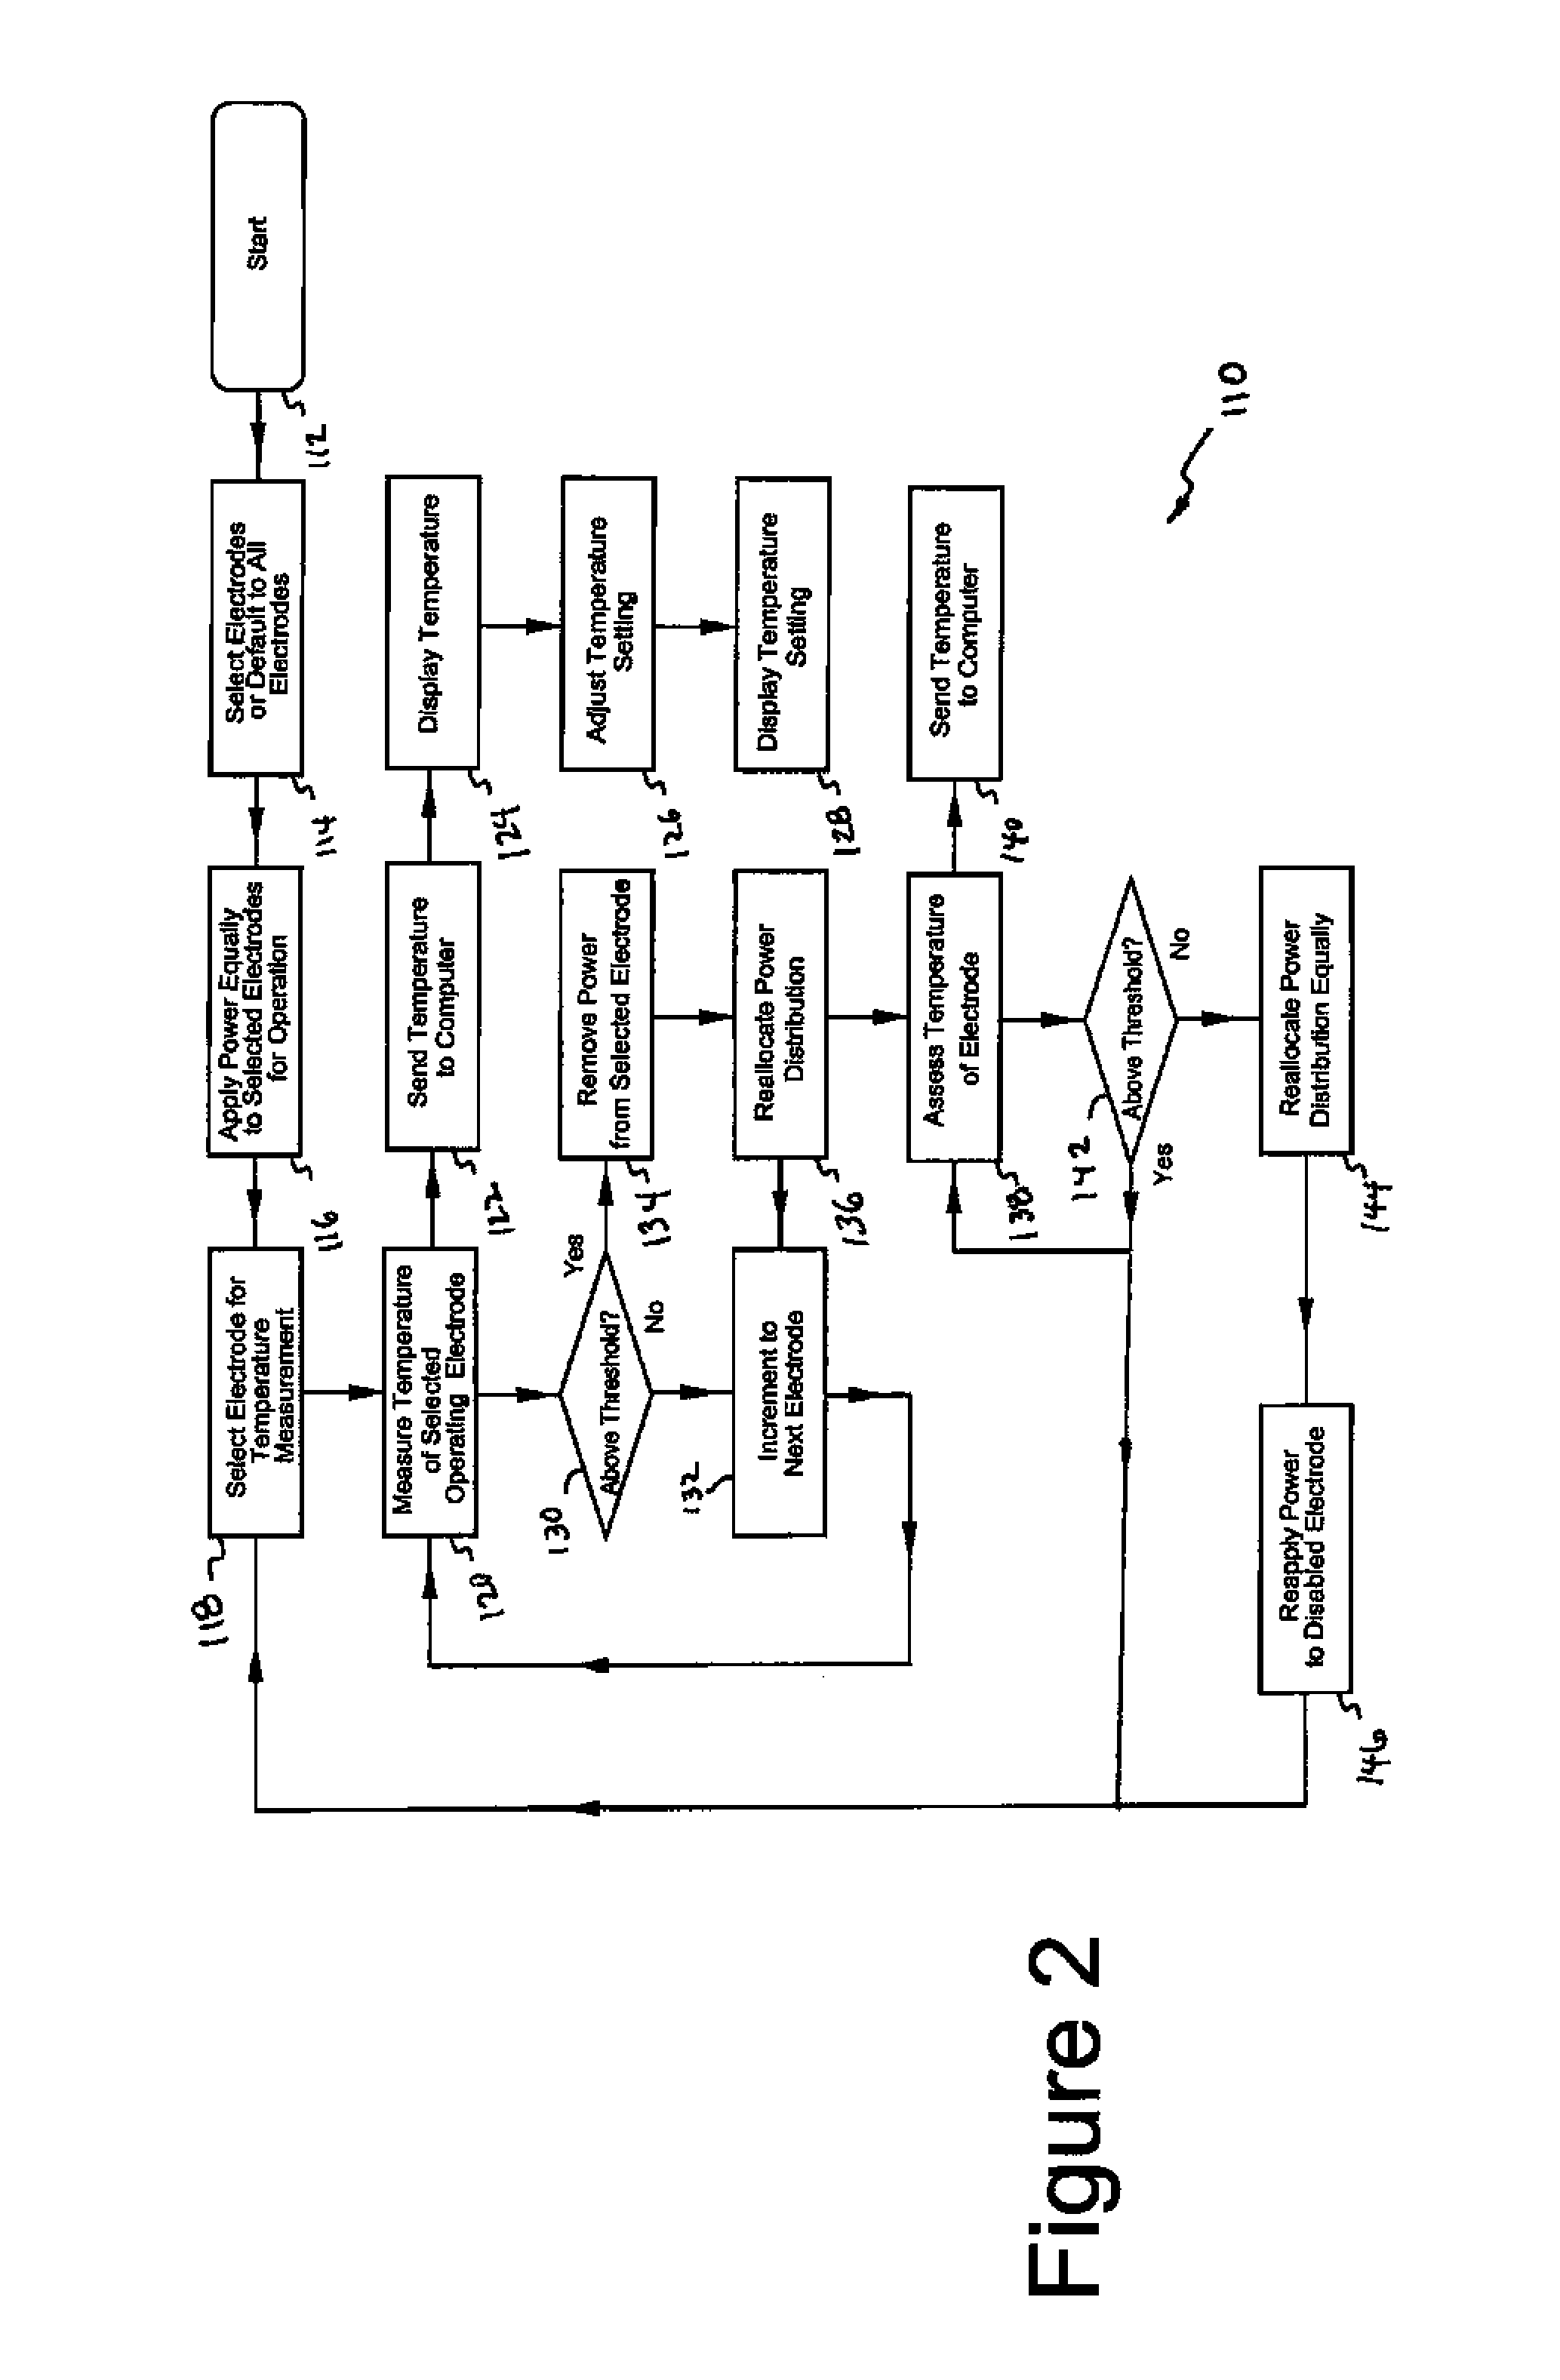 Temperature responsive ablation RF driving for moderating return electrode temperature